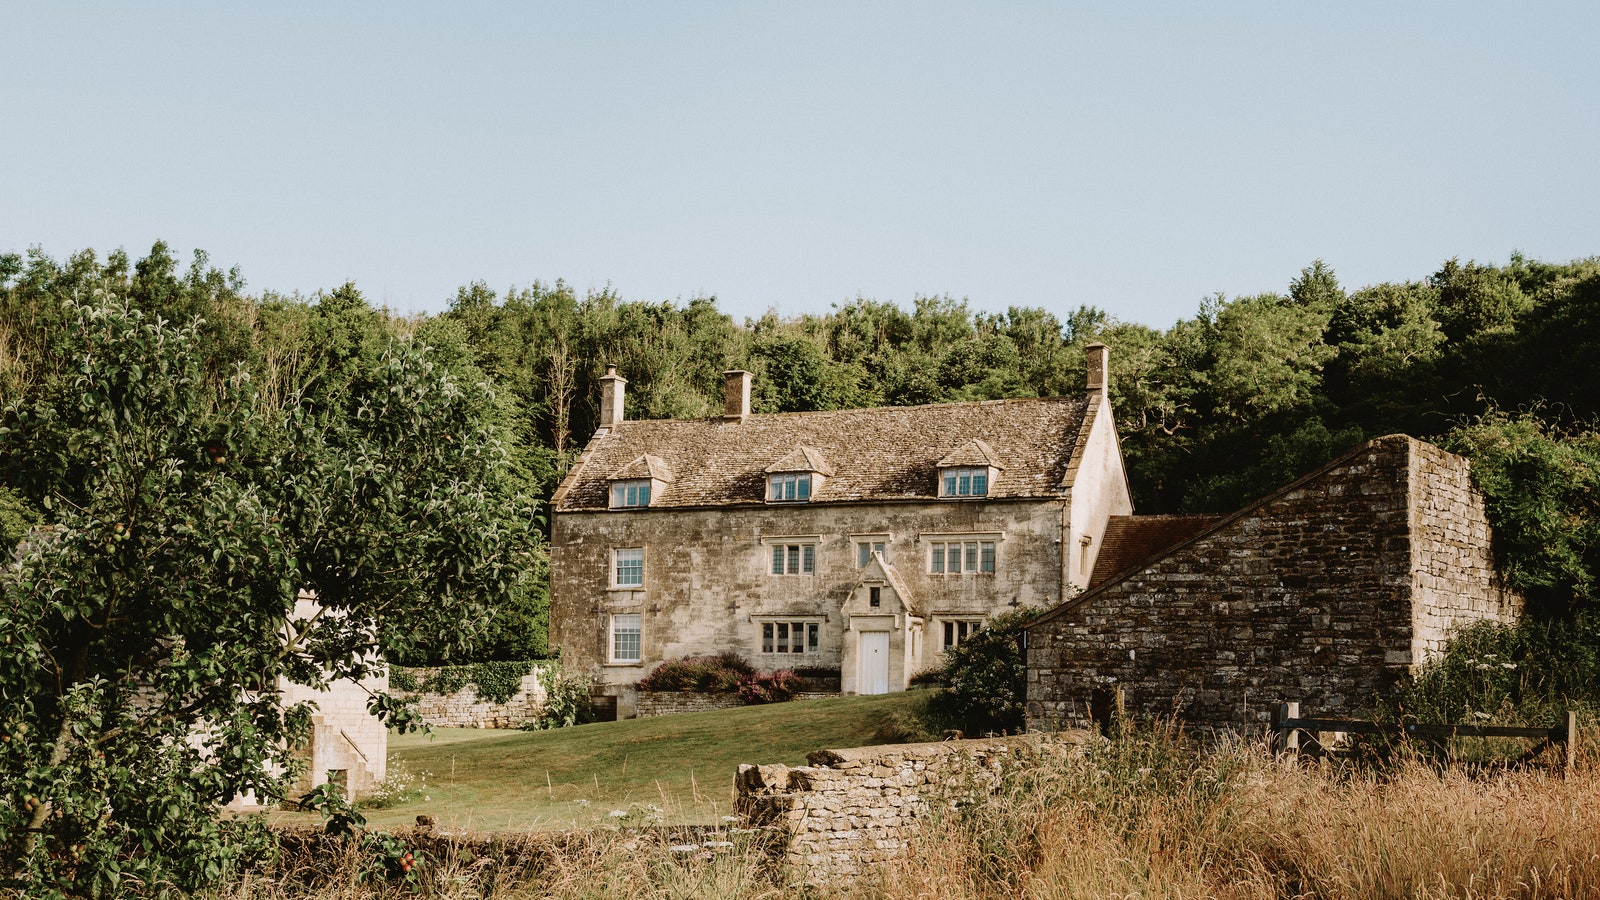 An 18th-century Gloucestershire farmhouse with a simple, relaxed interior